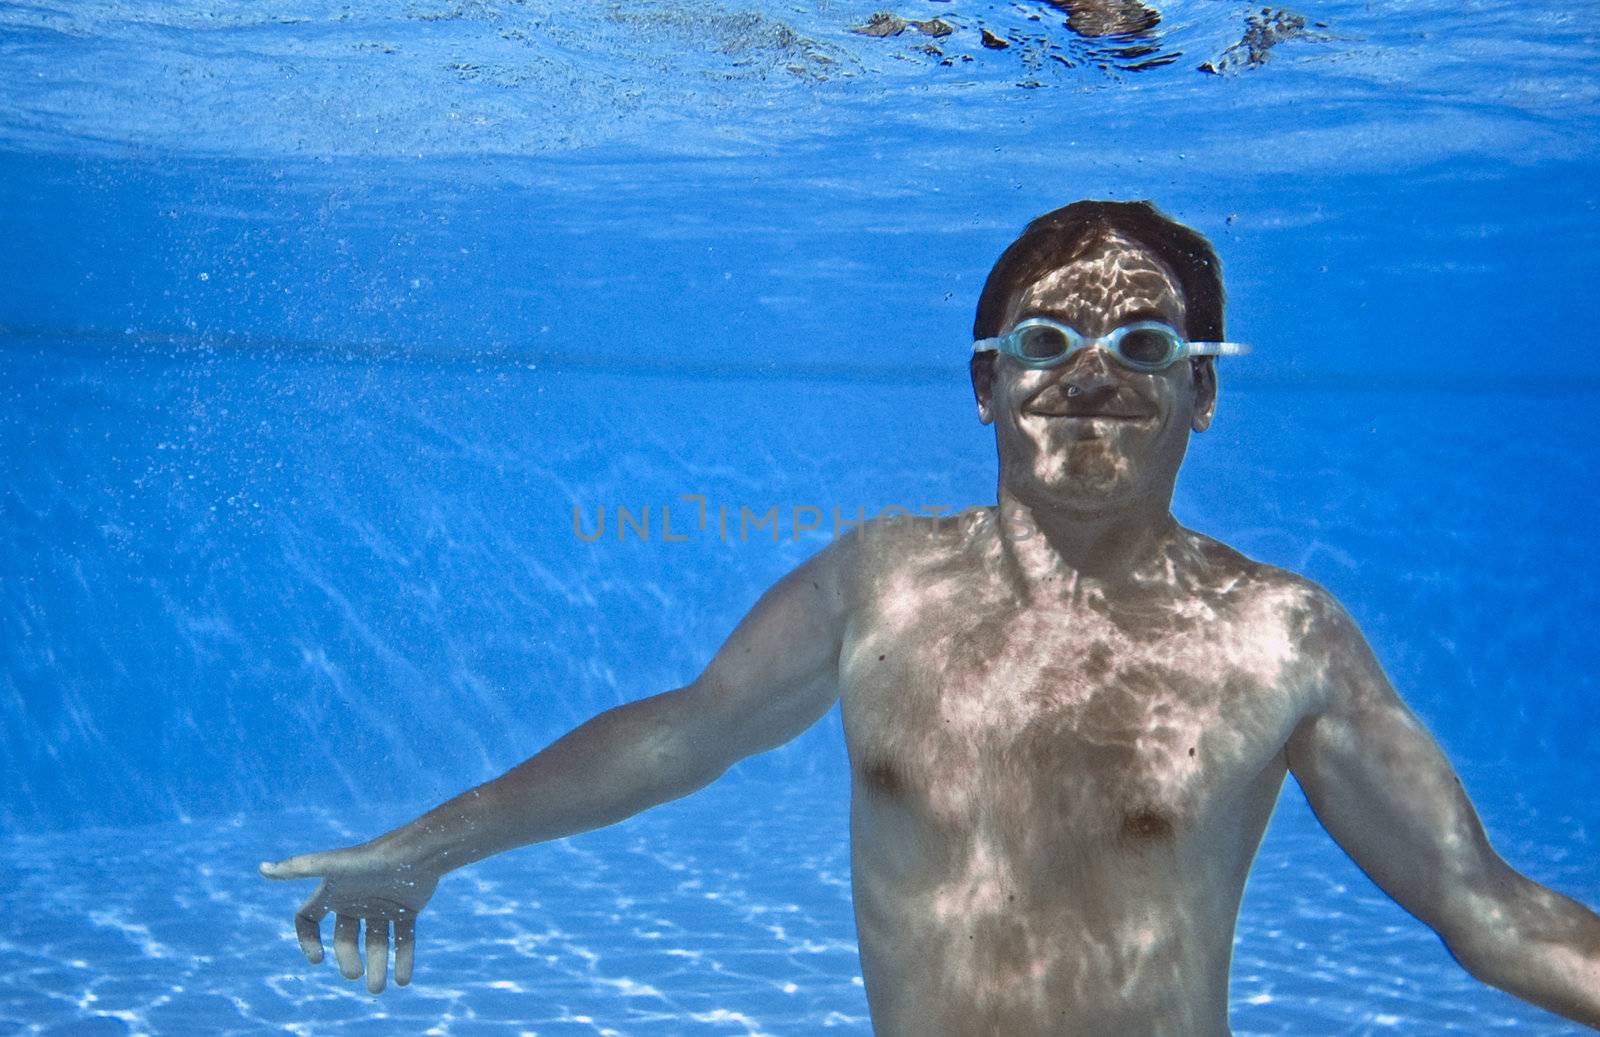 Crazy man under water in the pool